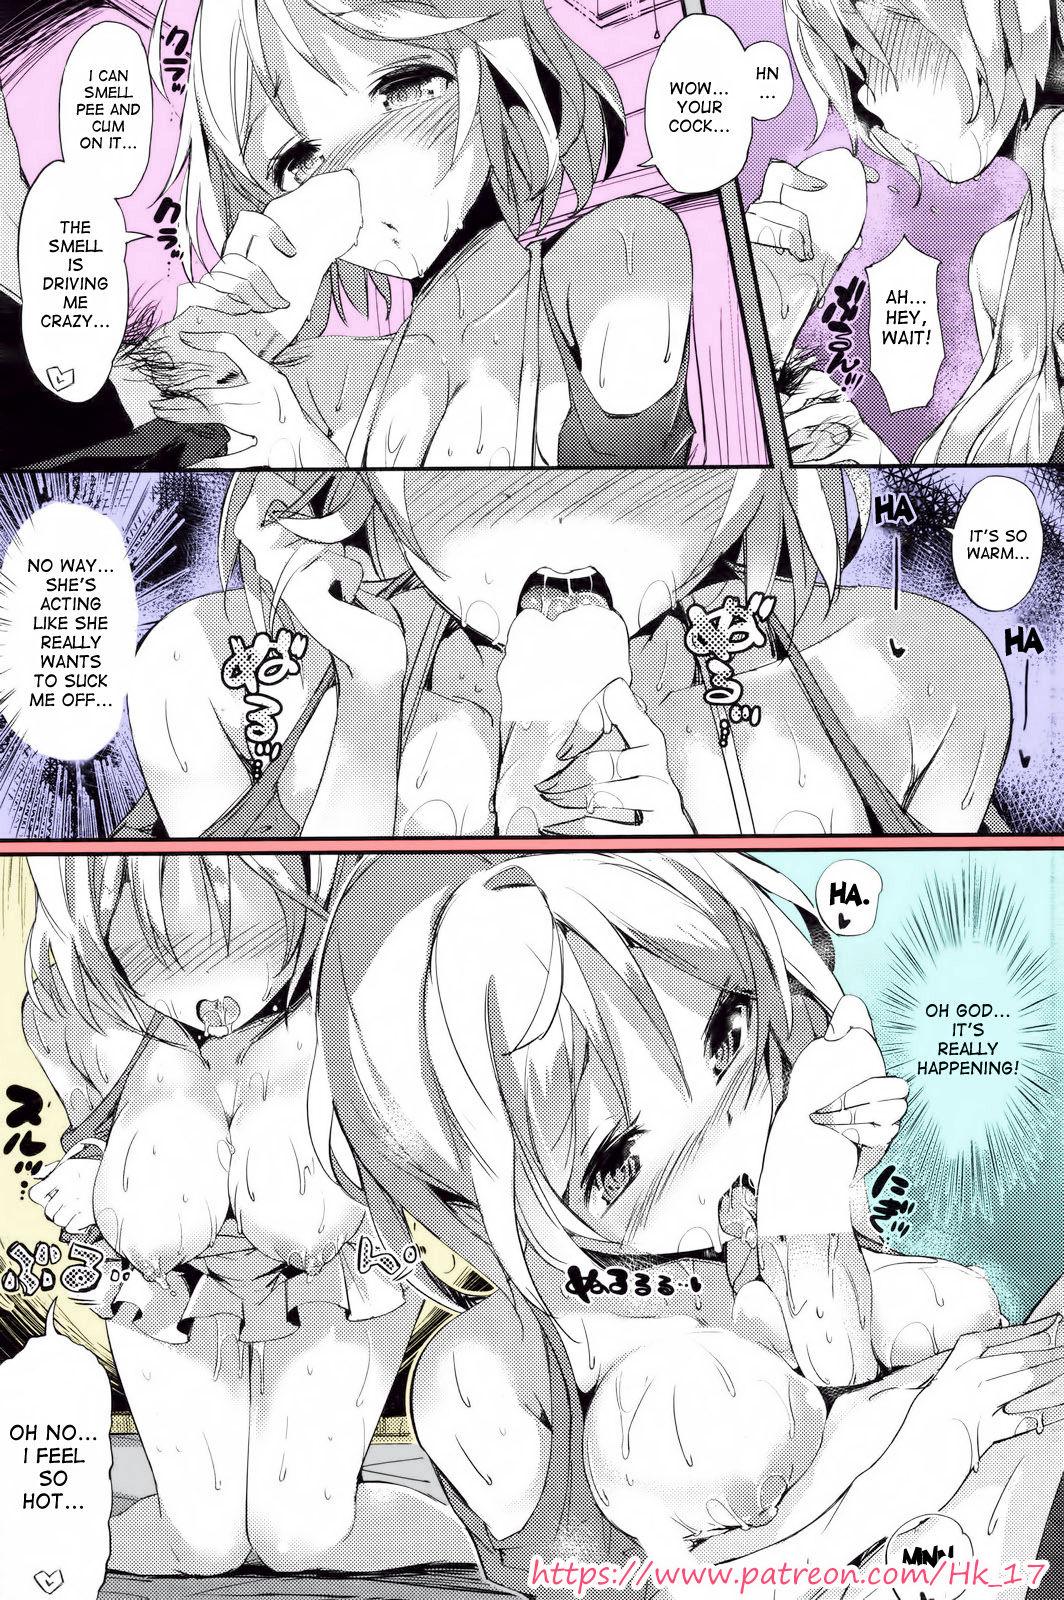 [Patreon] Hk_17 - Lovely Scent - Momi - Full Color [English] 72